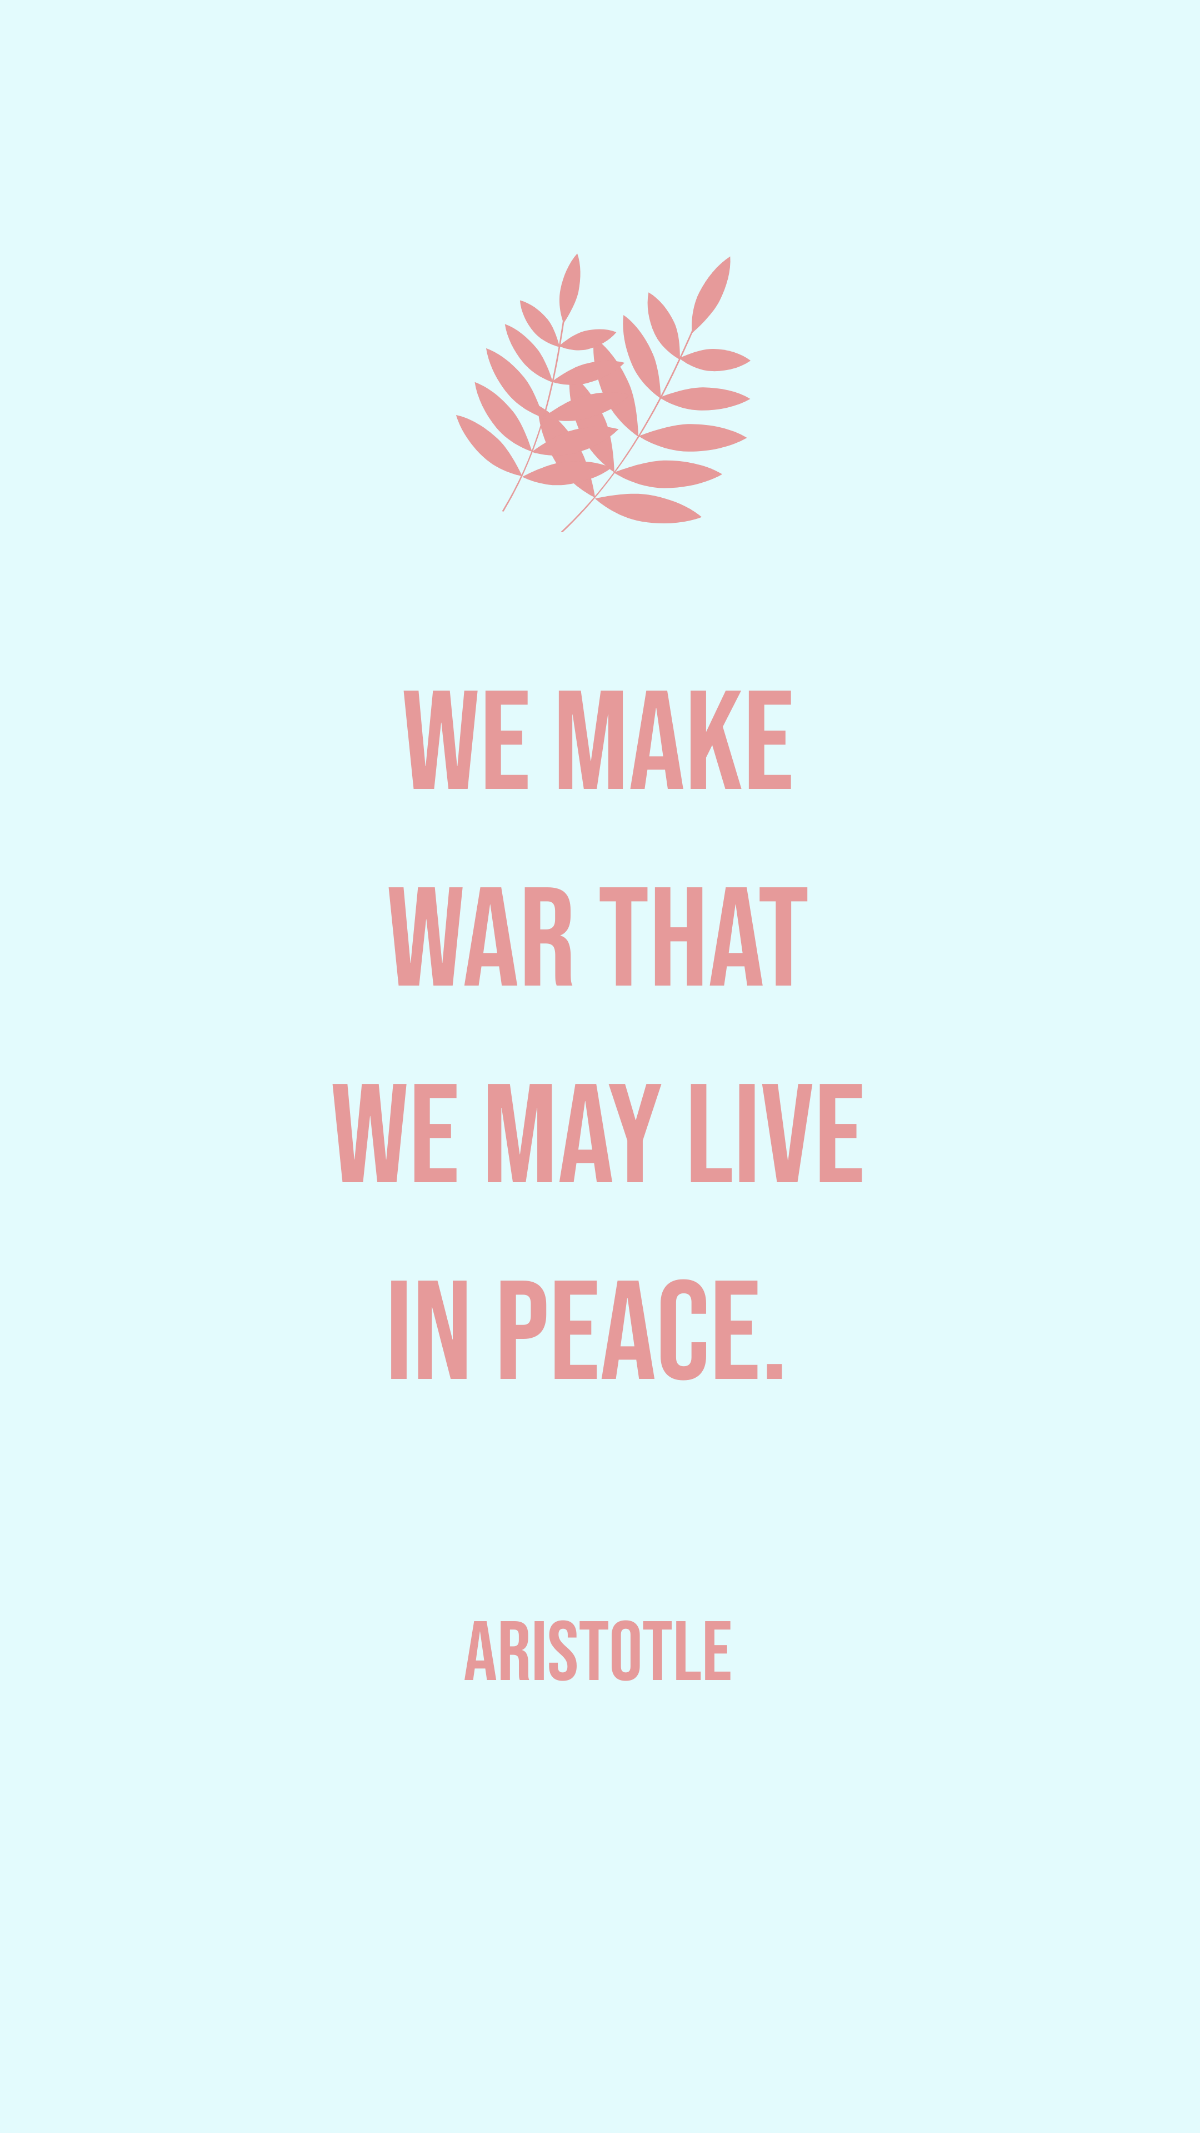 Free Aristotle - We make war that we may live in peace. Template